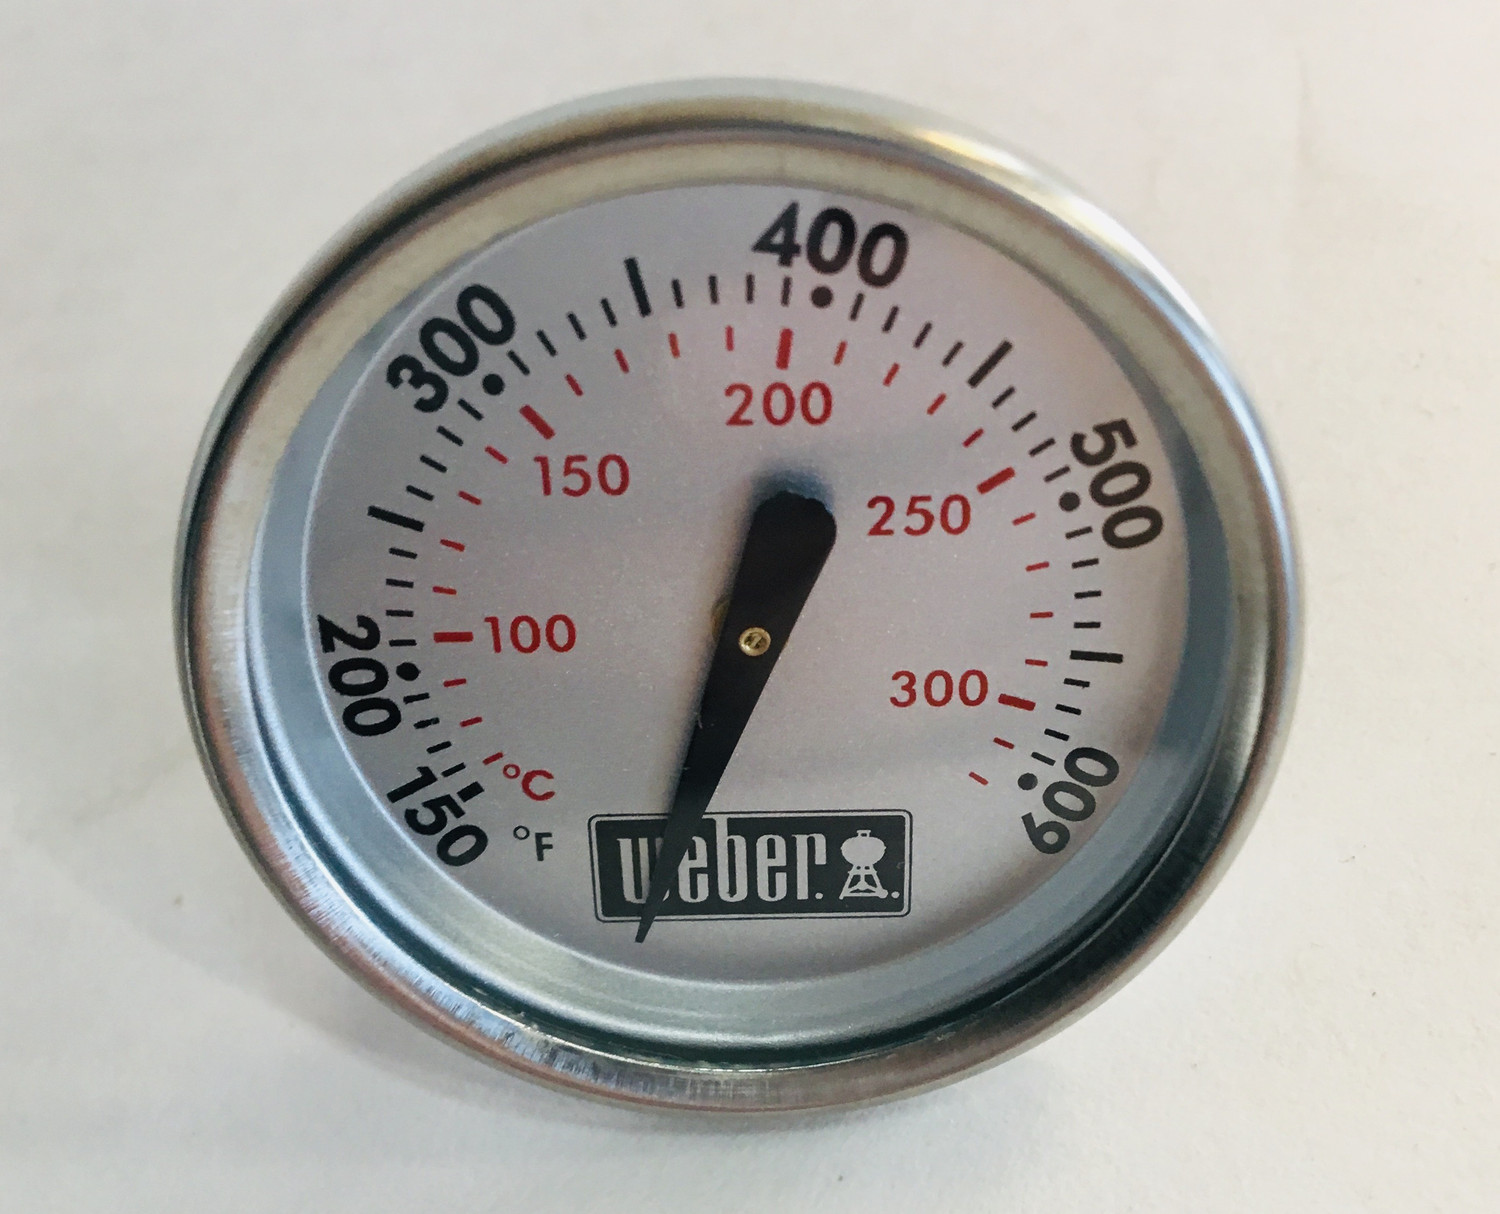 REPLACEMENT GRILL THERMOMETER Weber Q Series Genuine BBQ 60540 91384 Q100 Q200 